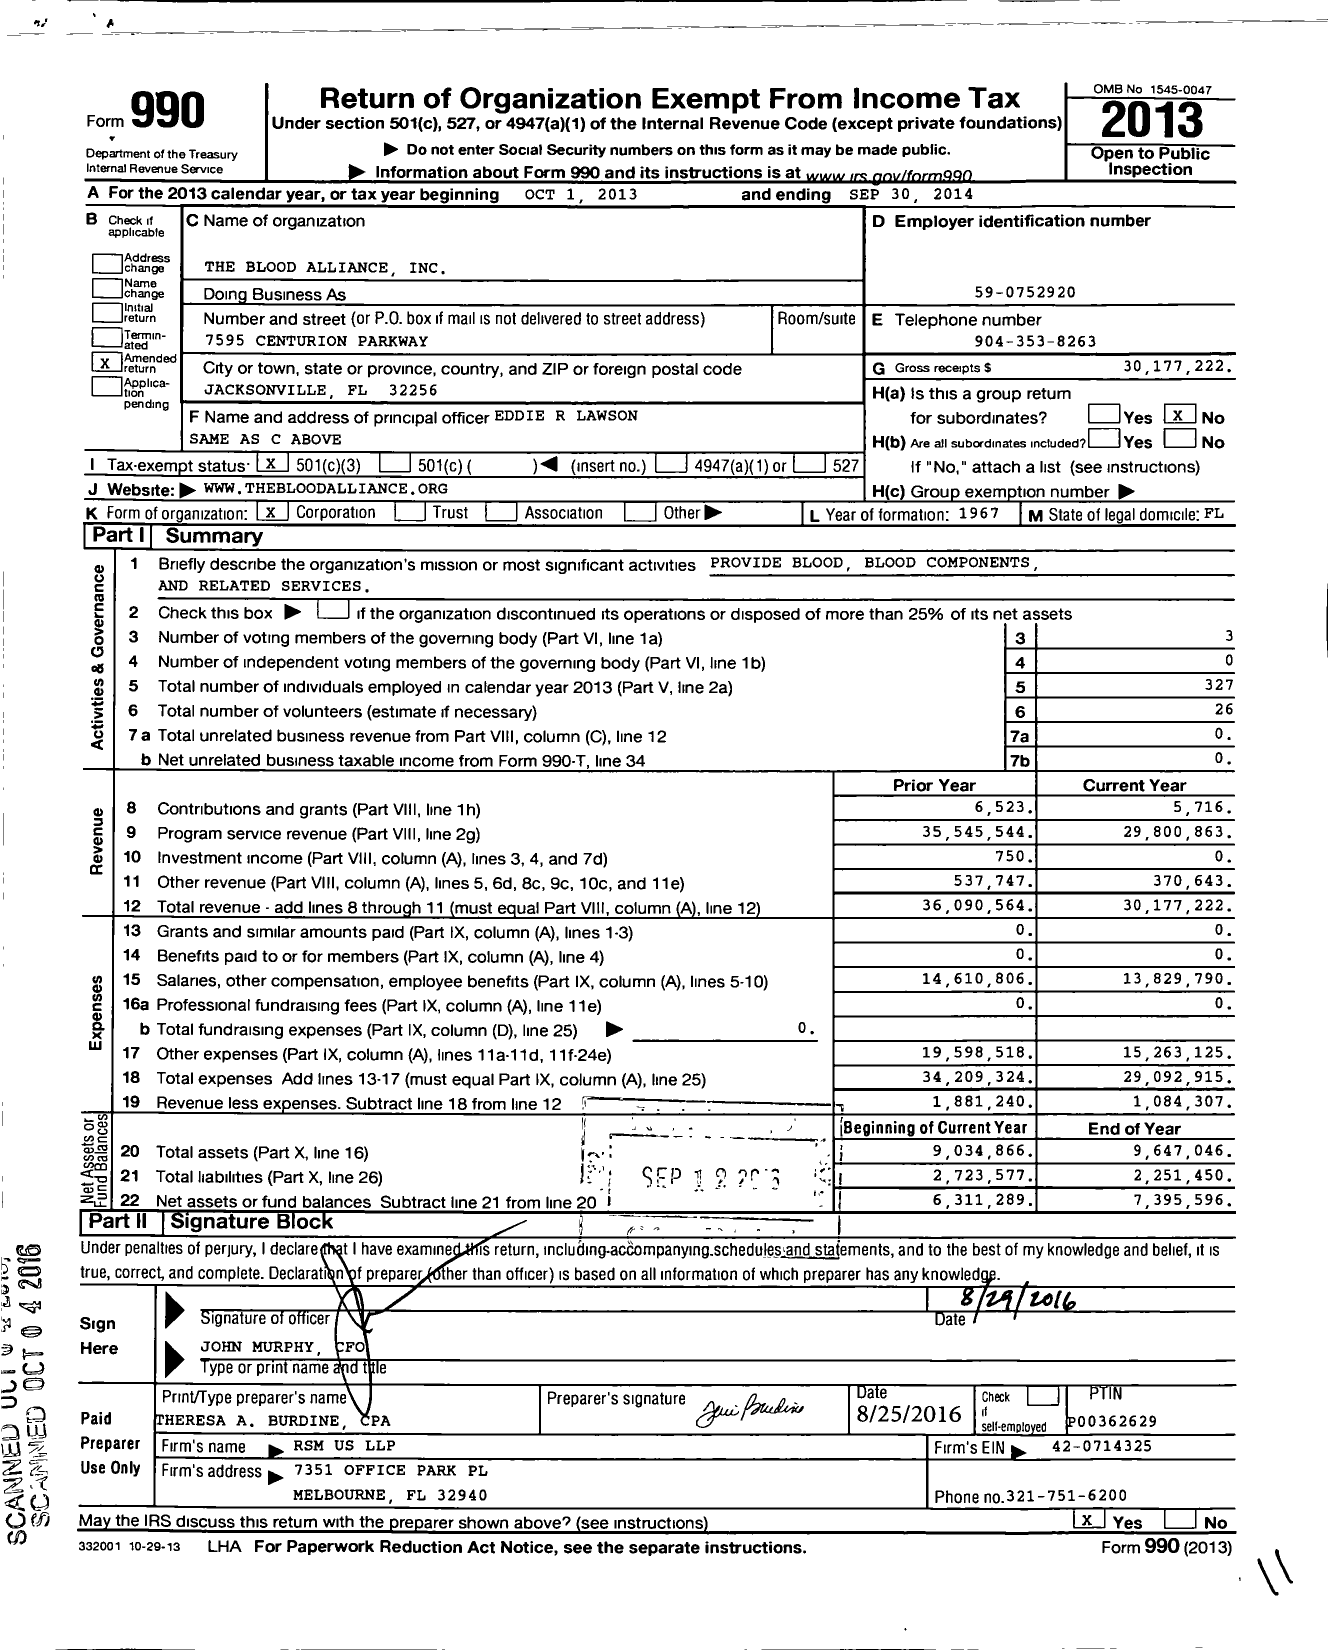 Image of first page of 2013 Form 990 for Jacksonville.com